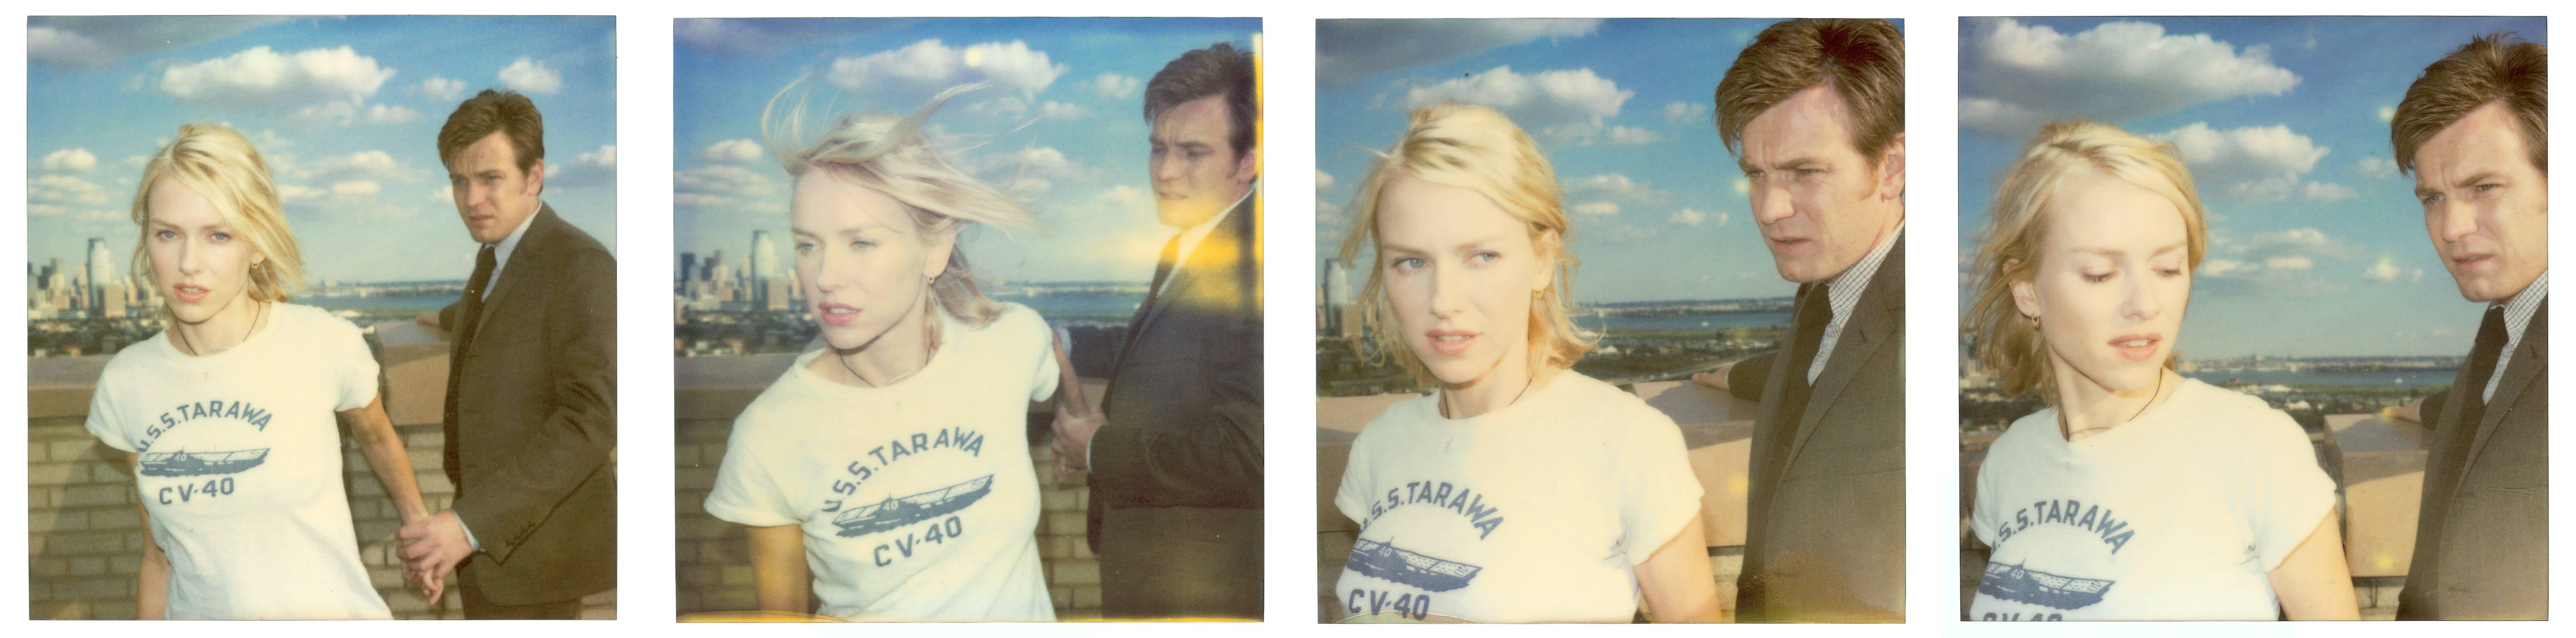 Stefanie Schneider Color Photograph - Lila and Sam from the movie Stay with Ewan McGregor, Naomi Watts, mounted